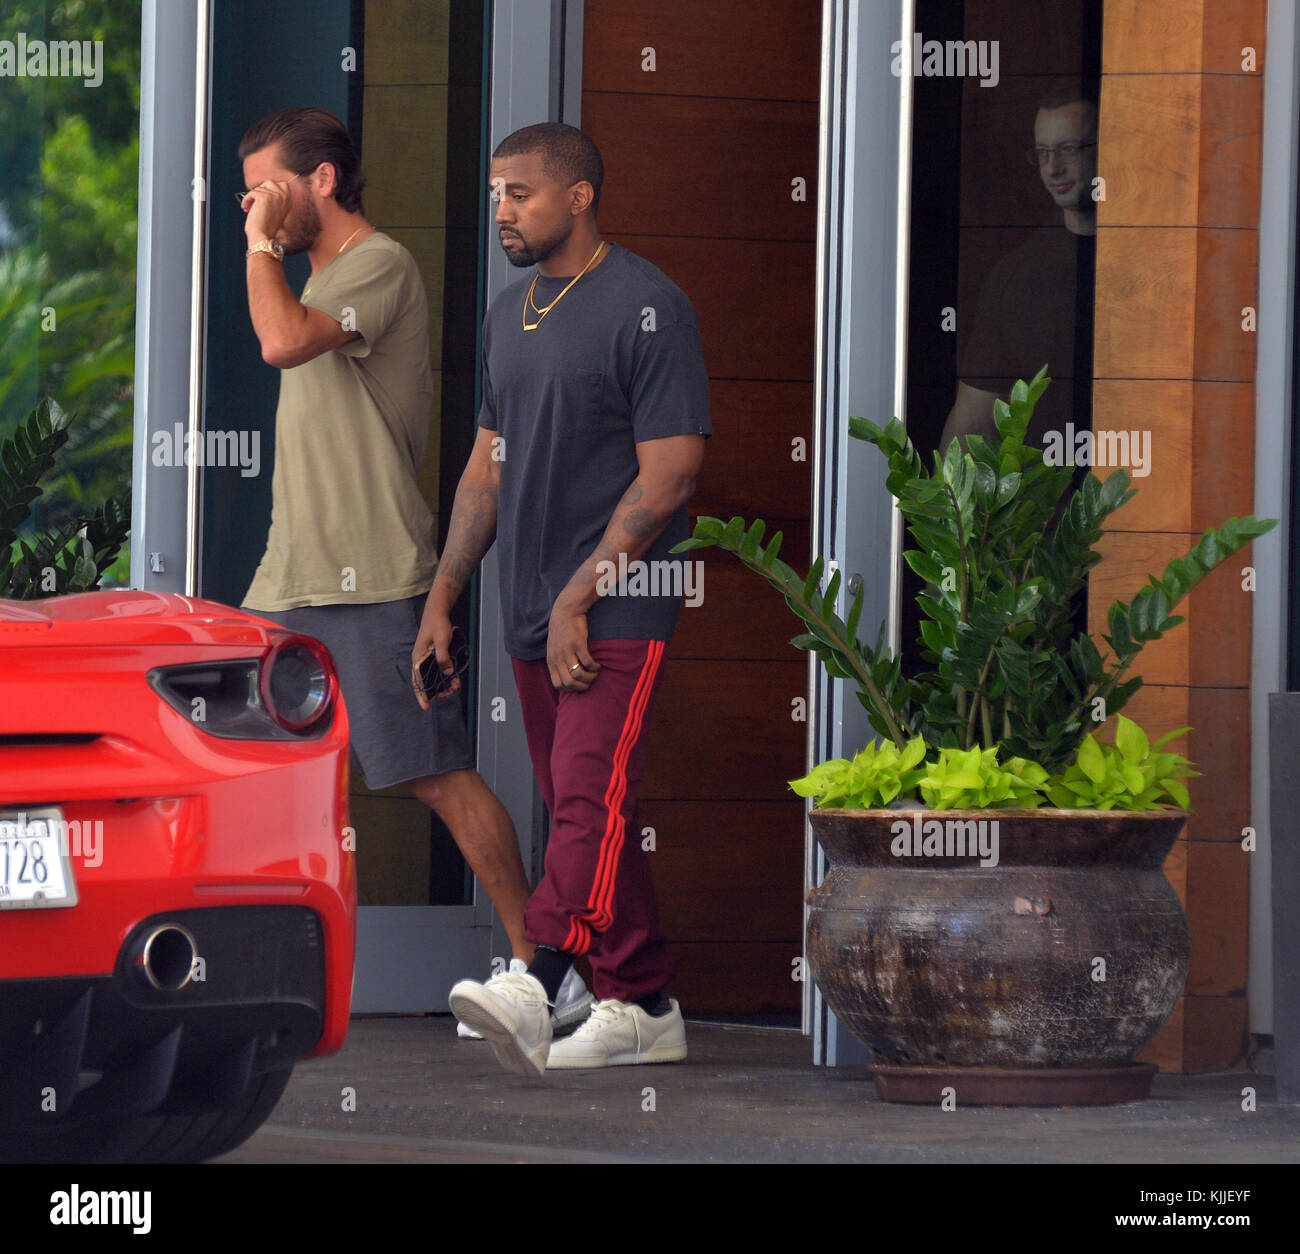 MIAMI BEACH, FL - SEPTEMBER 15: Scott Disick and Singer Kanye West leave  their Miami hotel doing their version of Miami Vice. They looked like  Crockett and Tubbs as the duo jumped